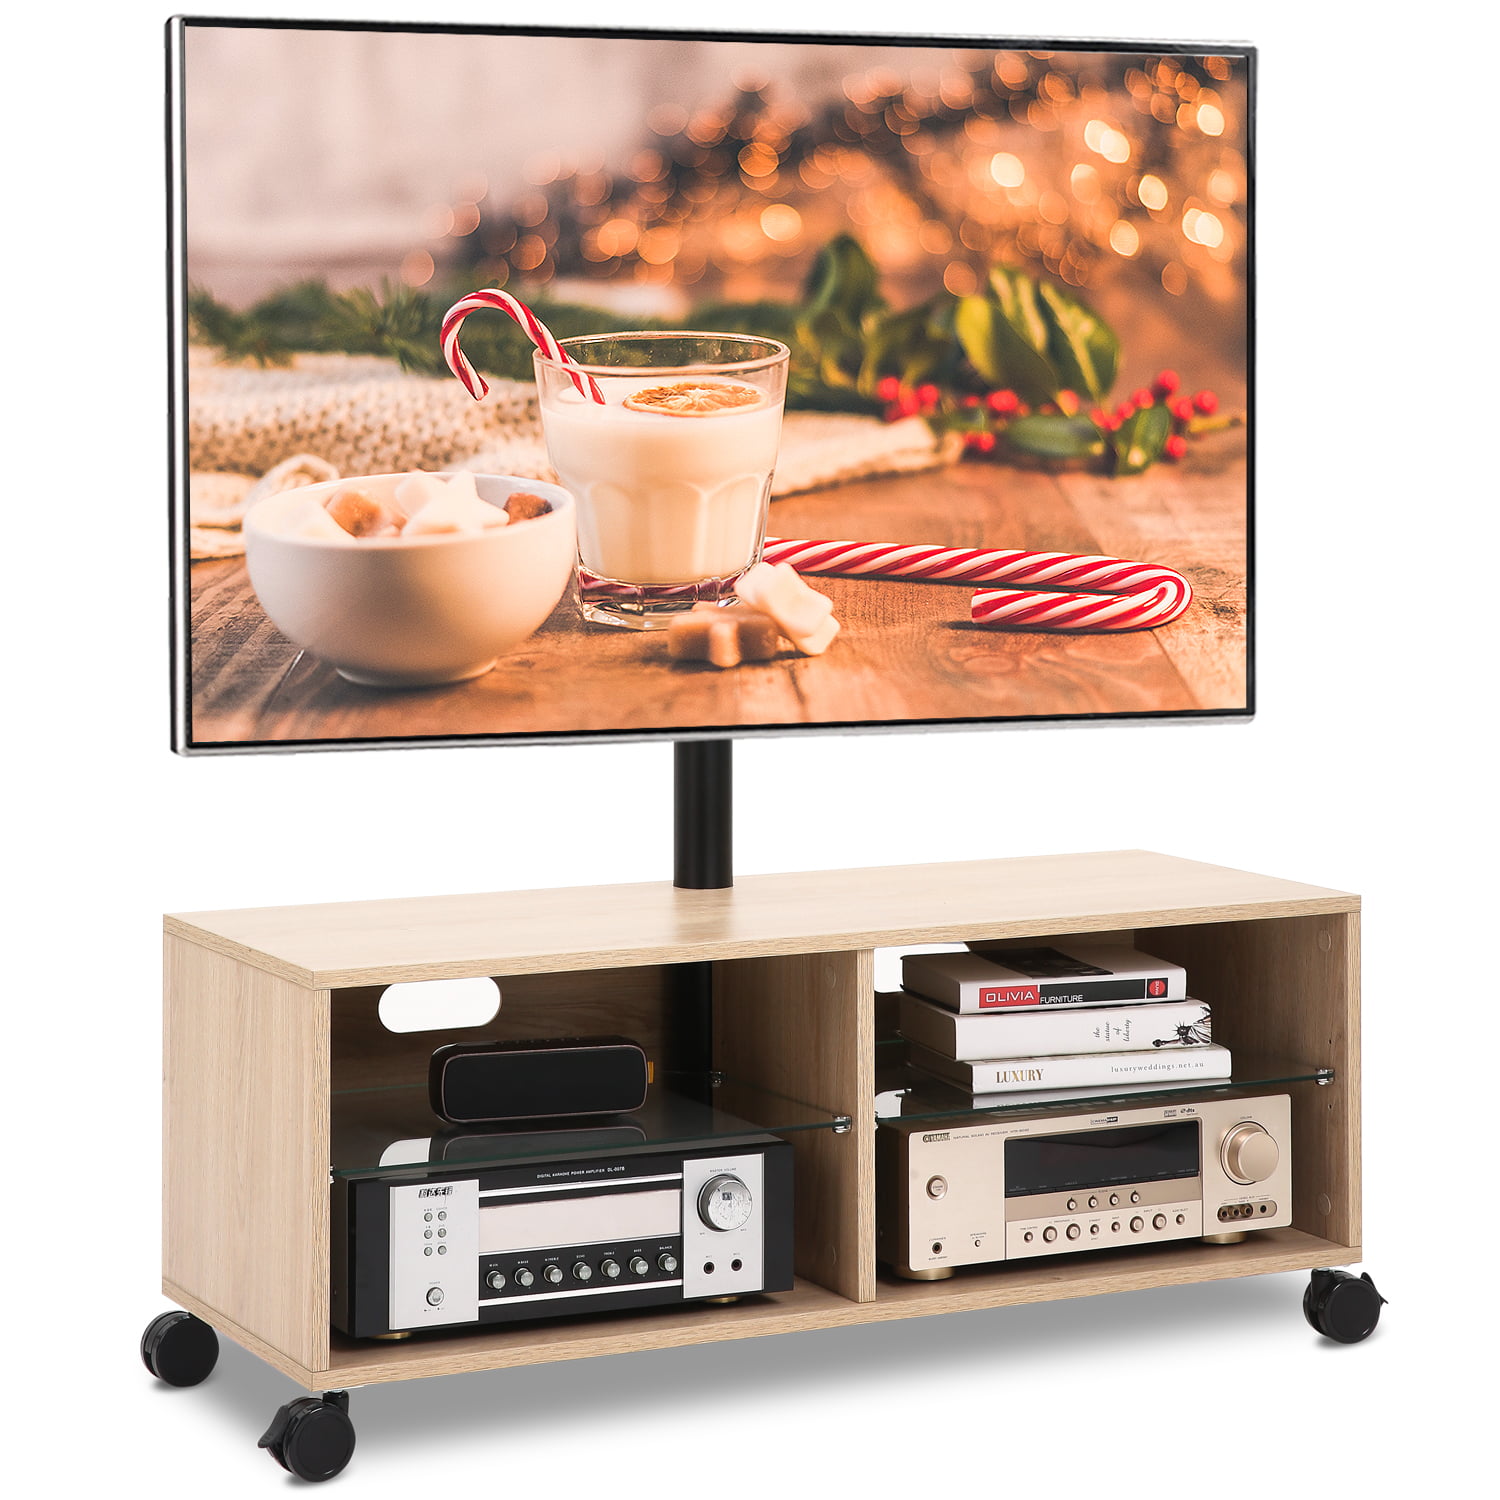 5Rcom Wood Media TV Stand Console with Swivel Mount ...